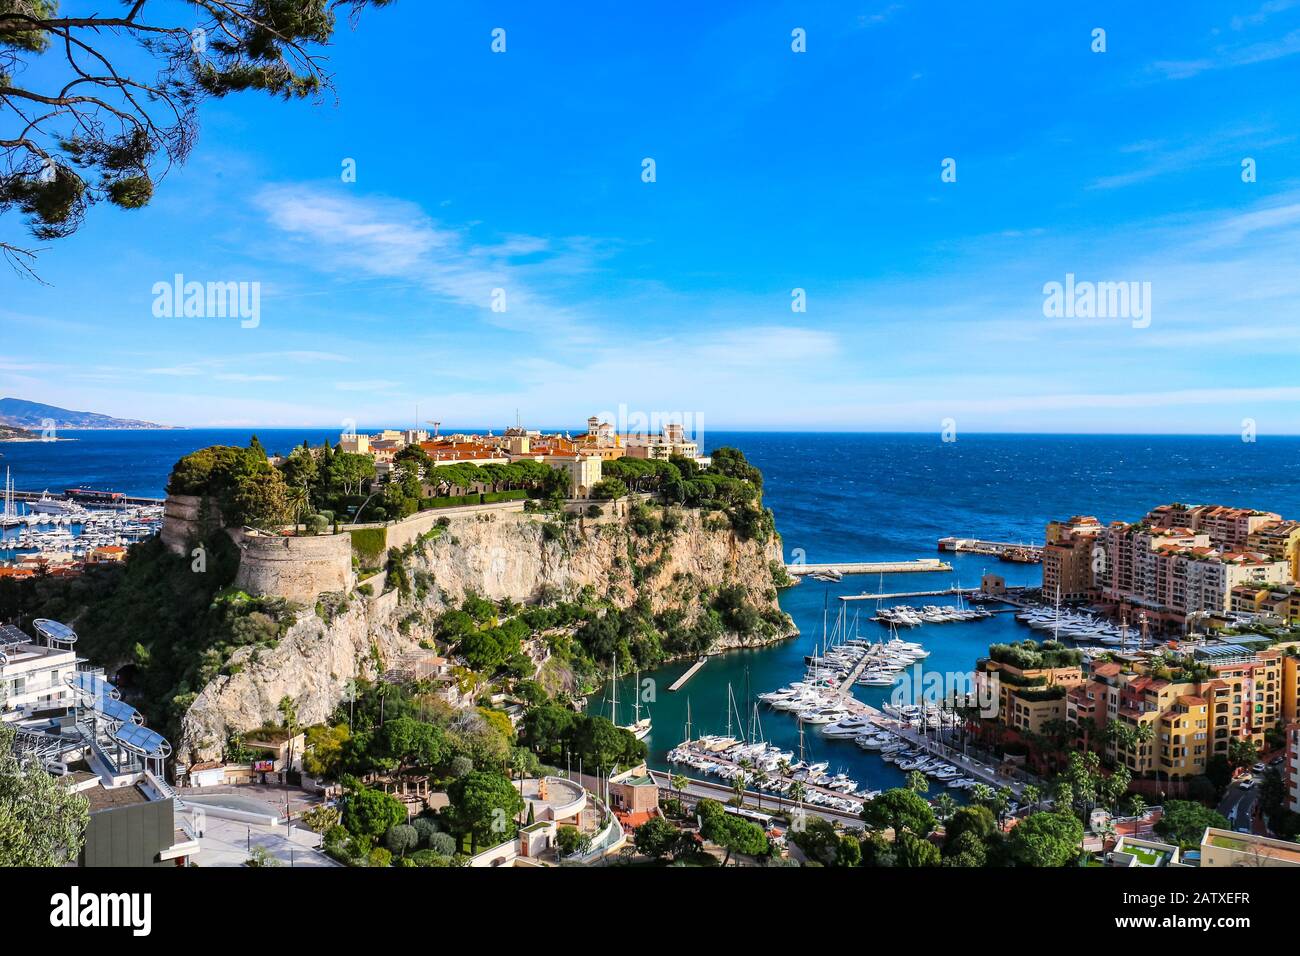 View of the Rock of Monaco (French: Le Rocher) and parts of Monte Carlo and Fontvielle harbors at the Mediterranean waterfront. Monaco-Ville, Monaco. Stock Photo